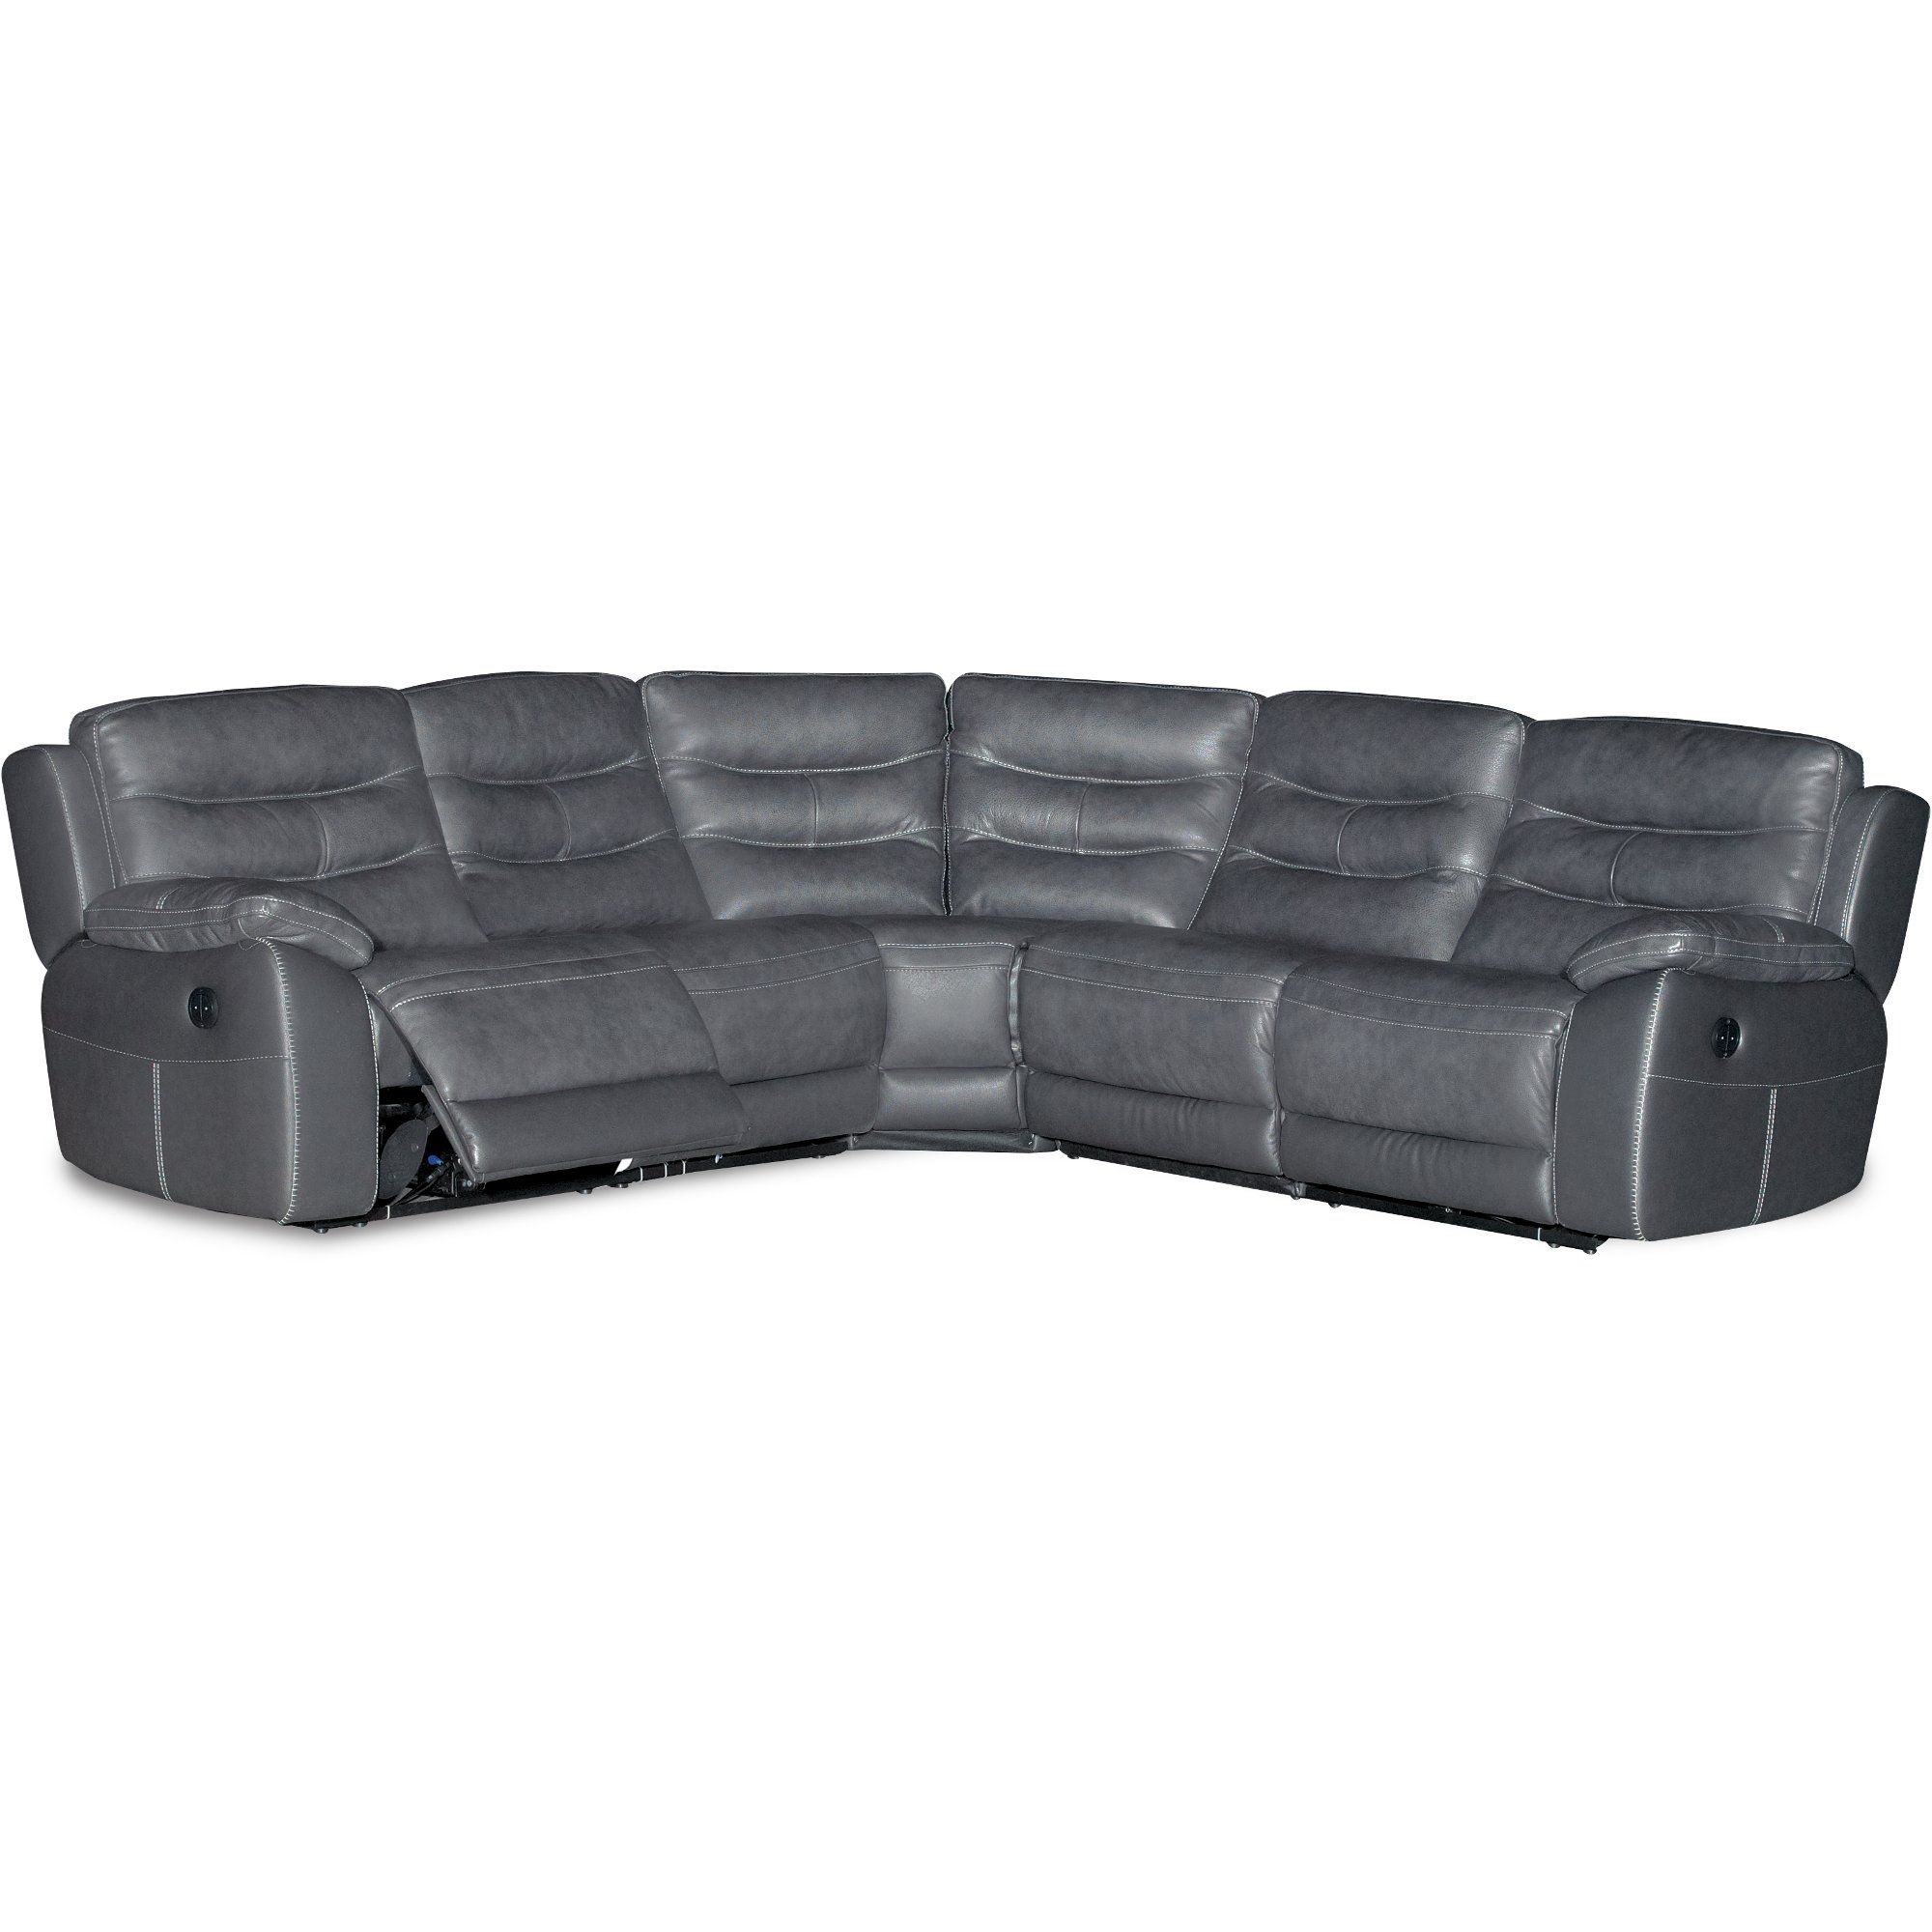 Charcoal Gray 5 Piece Power Reclining Sectional Sofa – Shawn | Rc With Denali Charcoal Grey 6 Piece Reclining Sectionals With 2 Power Headrests (View 5 of 25)